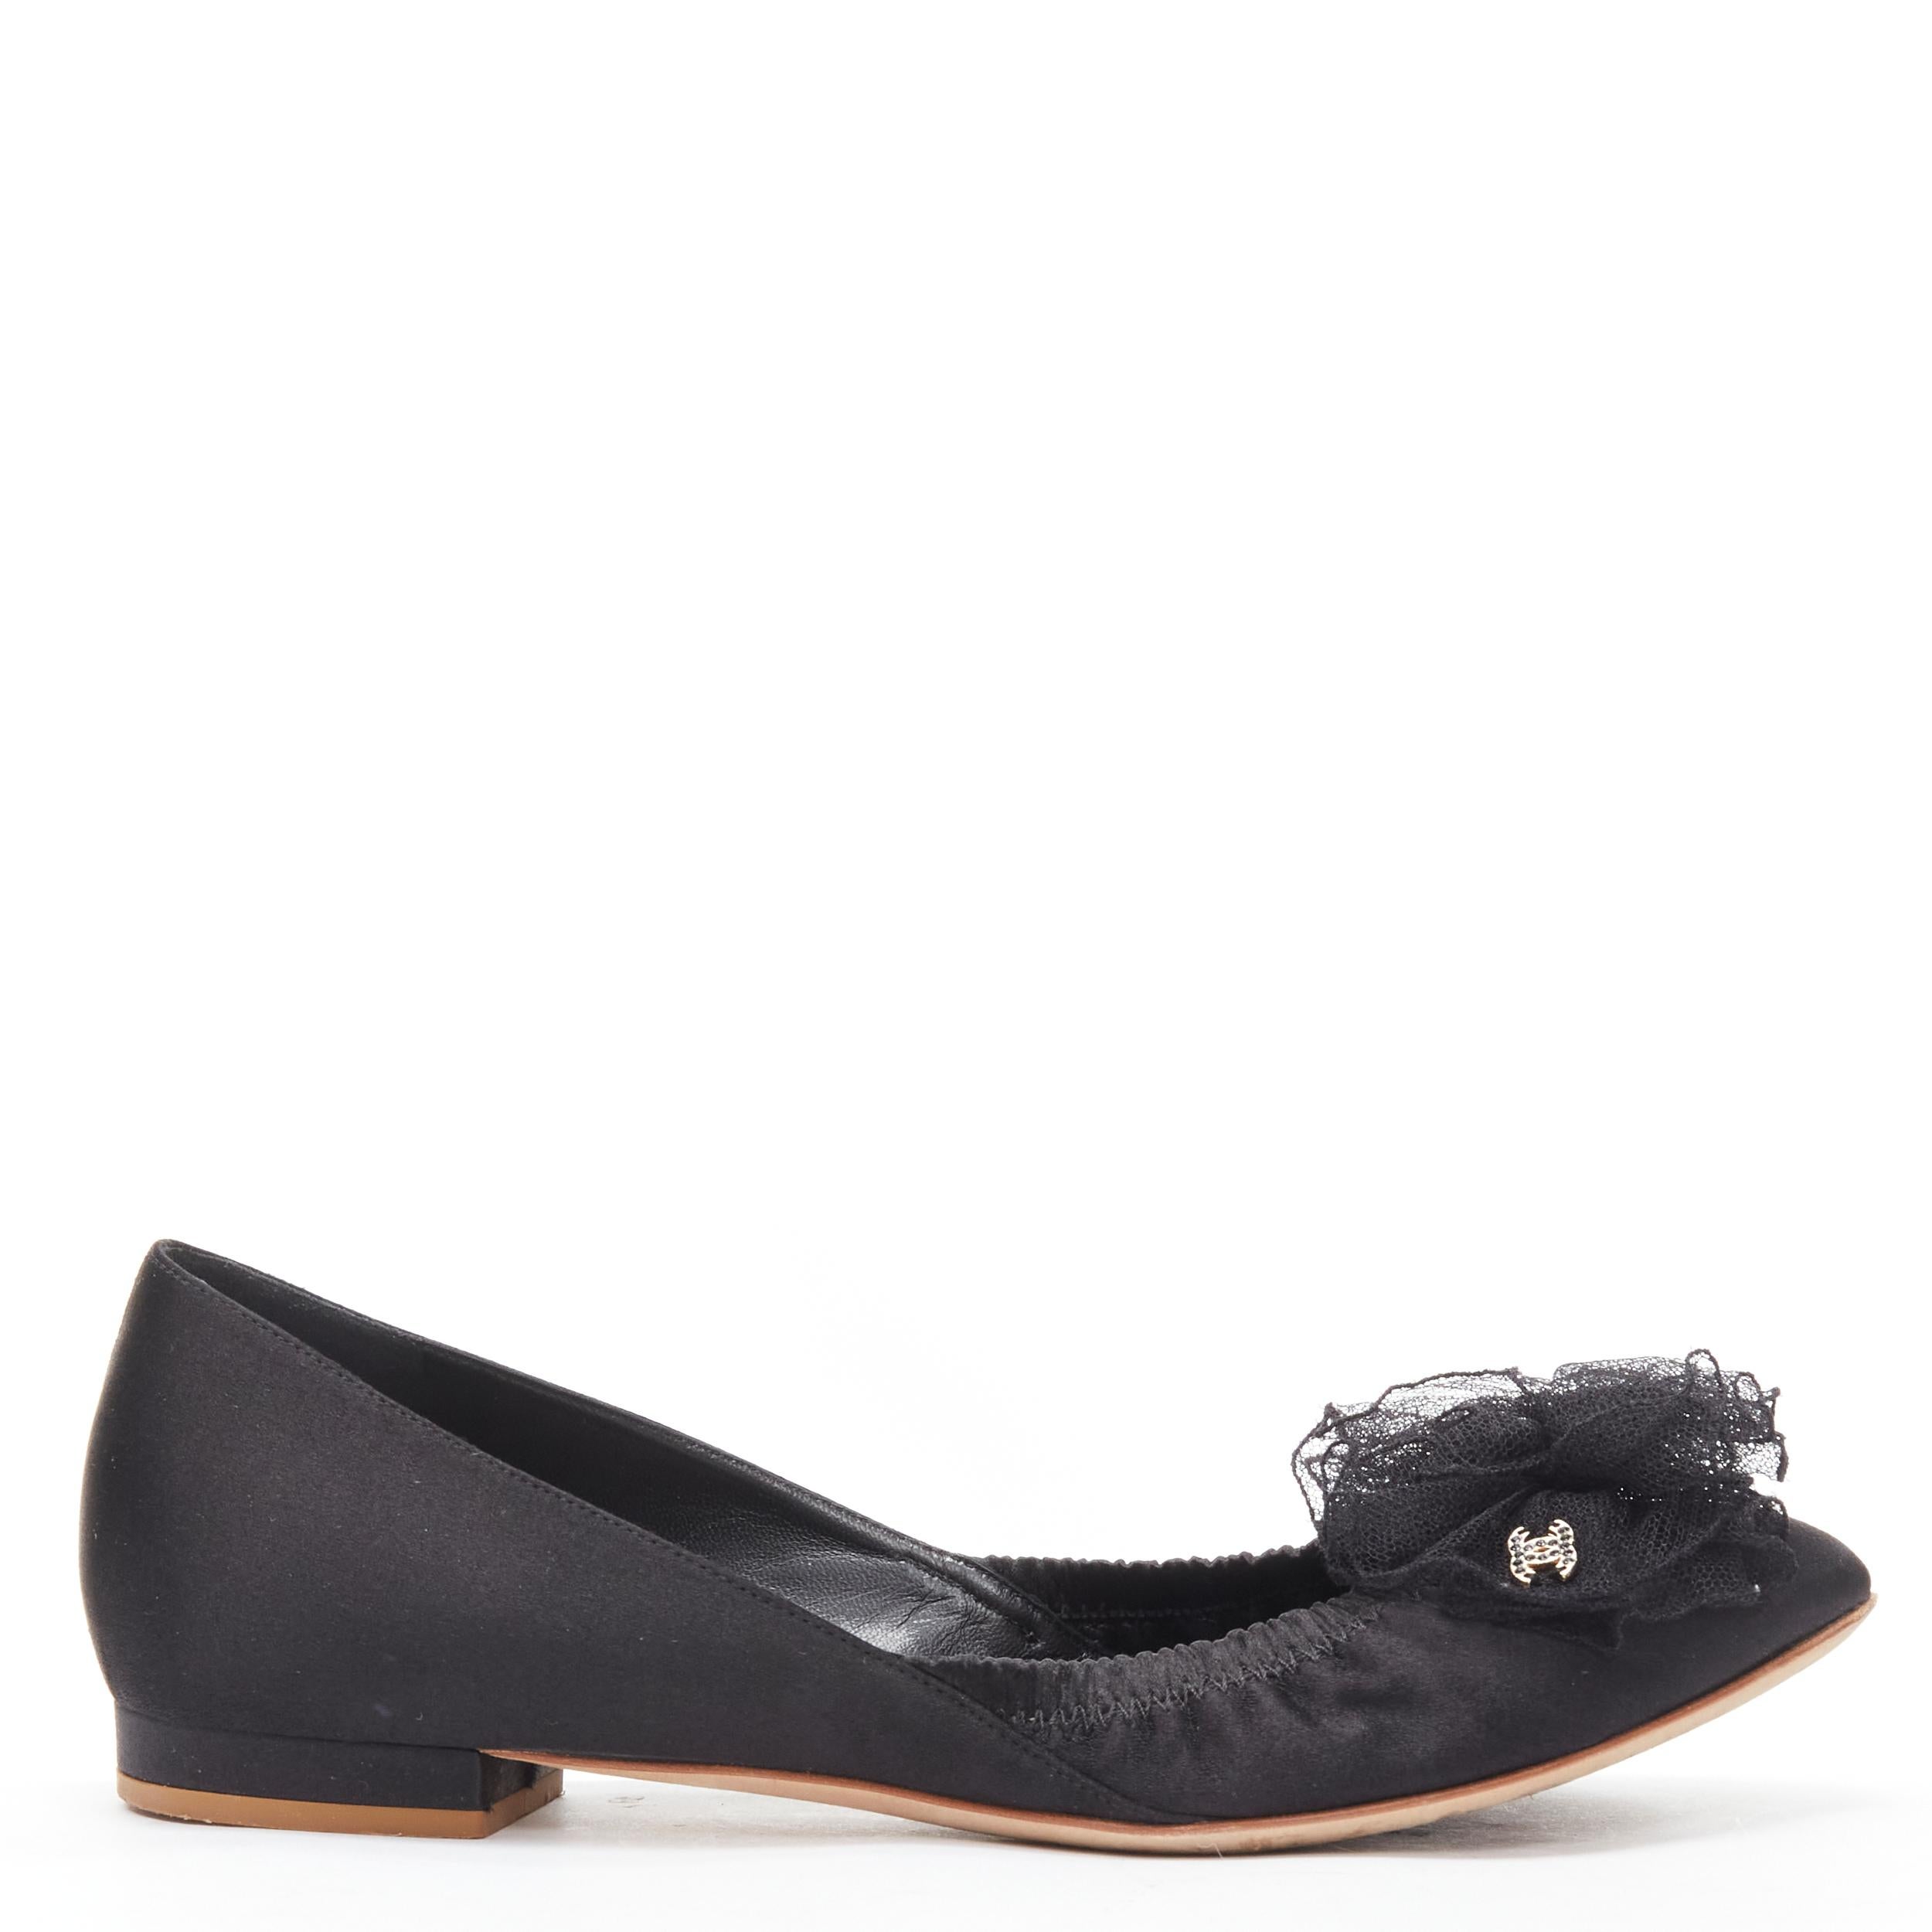 CHANEL 08C G G25751 black lace Camellia floral gold CC ballerina flats EU37.5 
Reference: MELK/A00214 
Brand: Chanel 
Material: Satin 
Color: Black 
Pattern: Solid 
Closure: Lace Up 
Extra Detail: Cc gold-tone CC detail. 
Made in: Italy 

CONDITION: